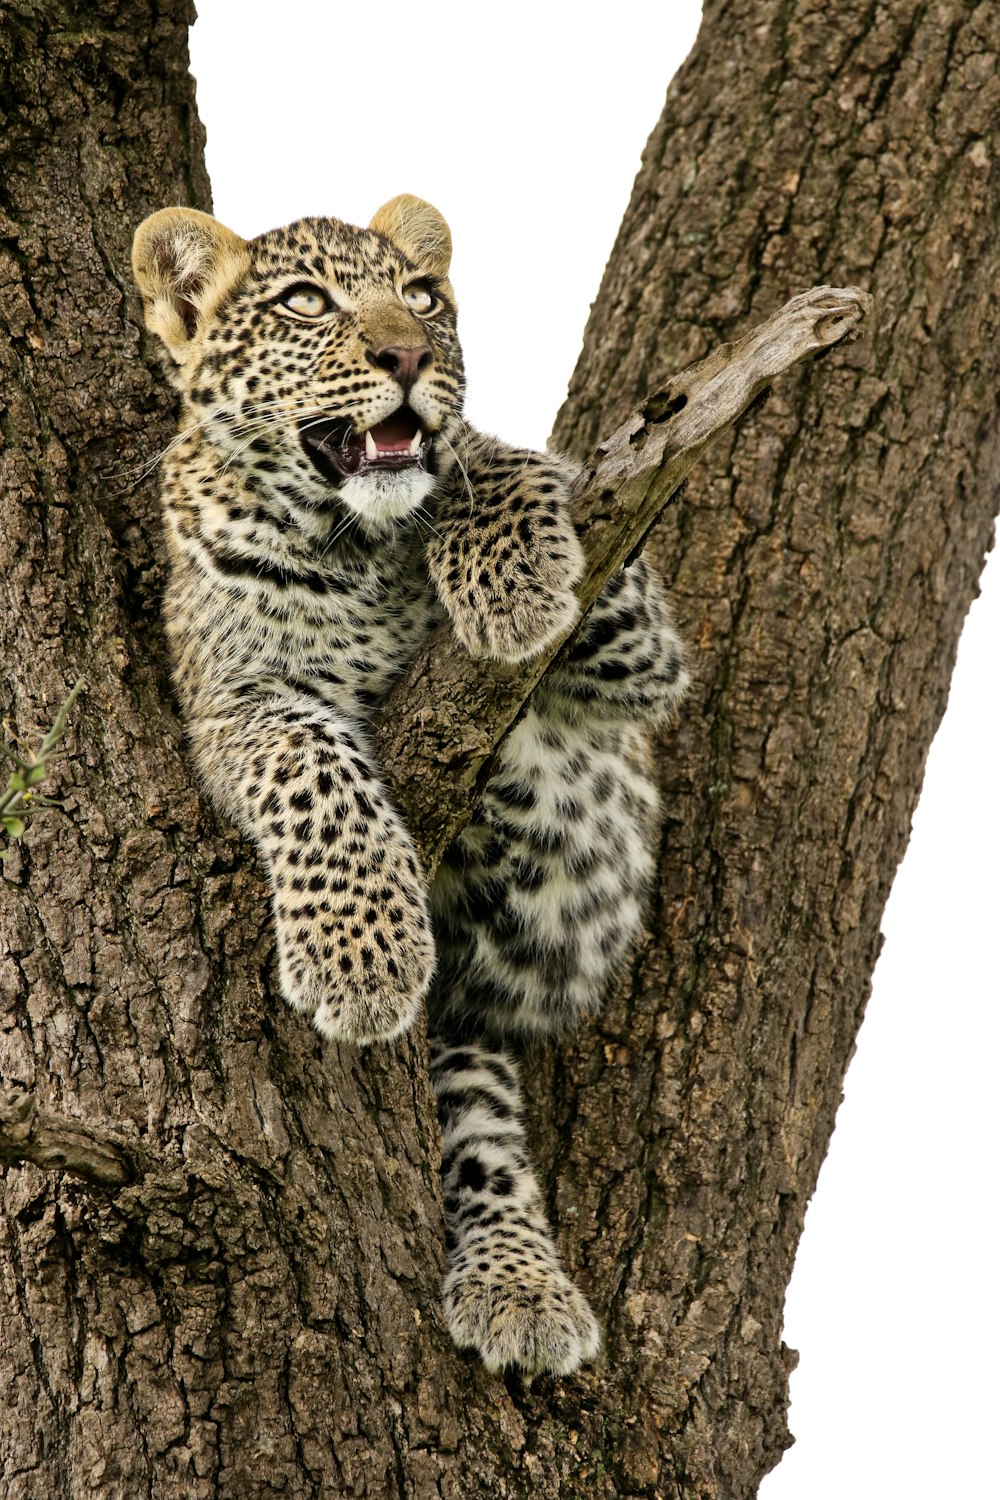 a baby leopard is sitting in a tree